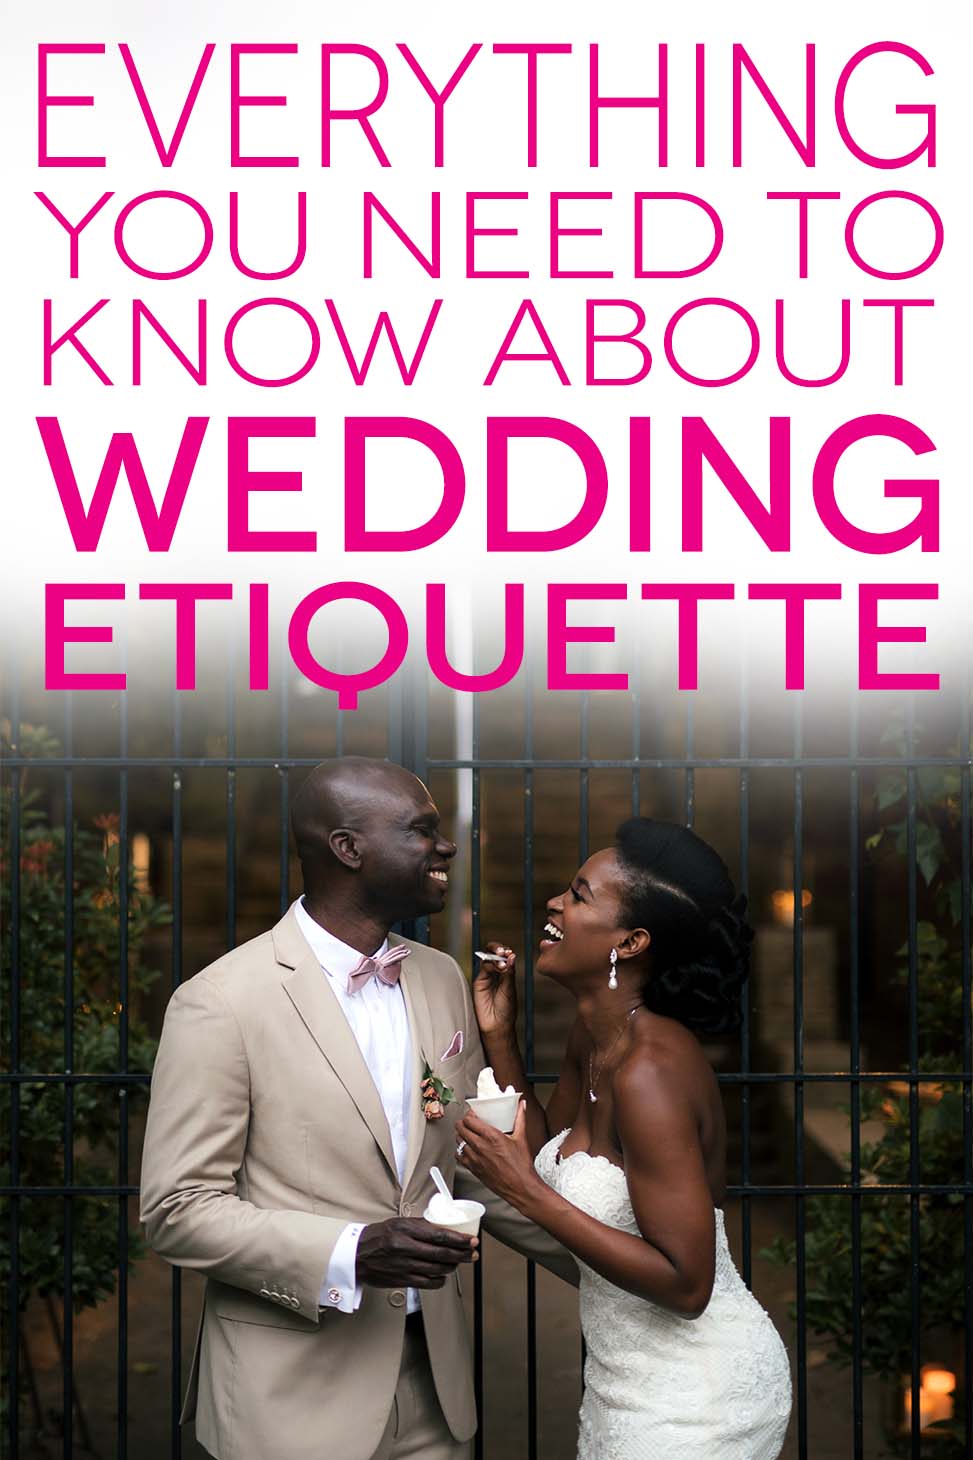 Everything you need to know about wedding etiquette pink text over image of wedding couple eating ice cream